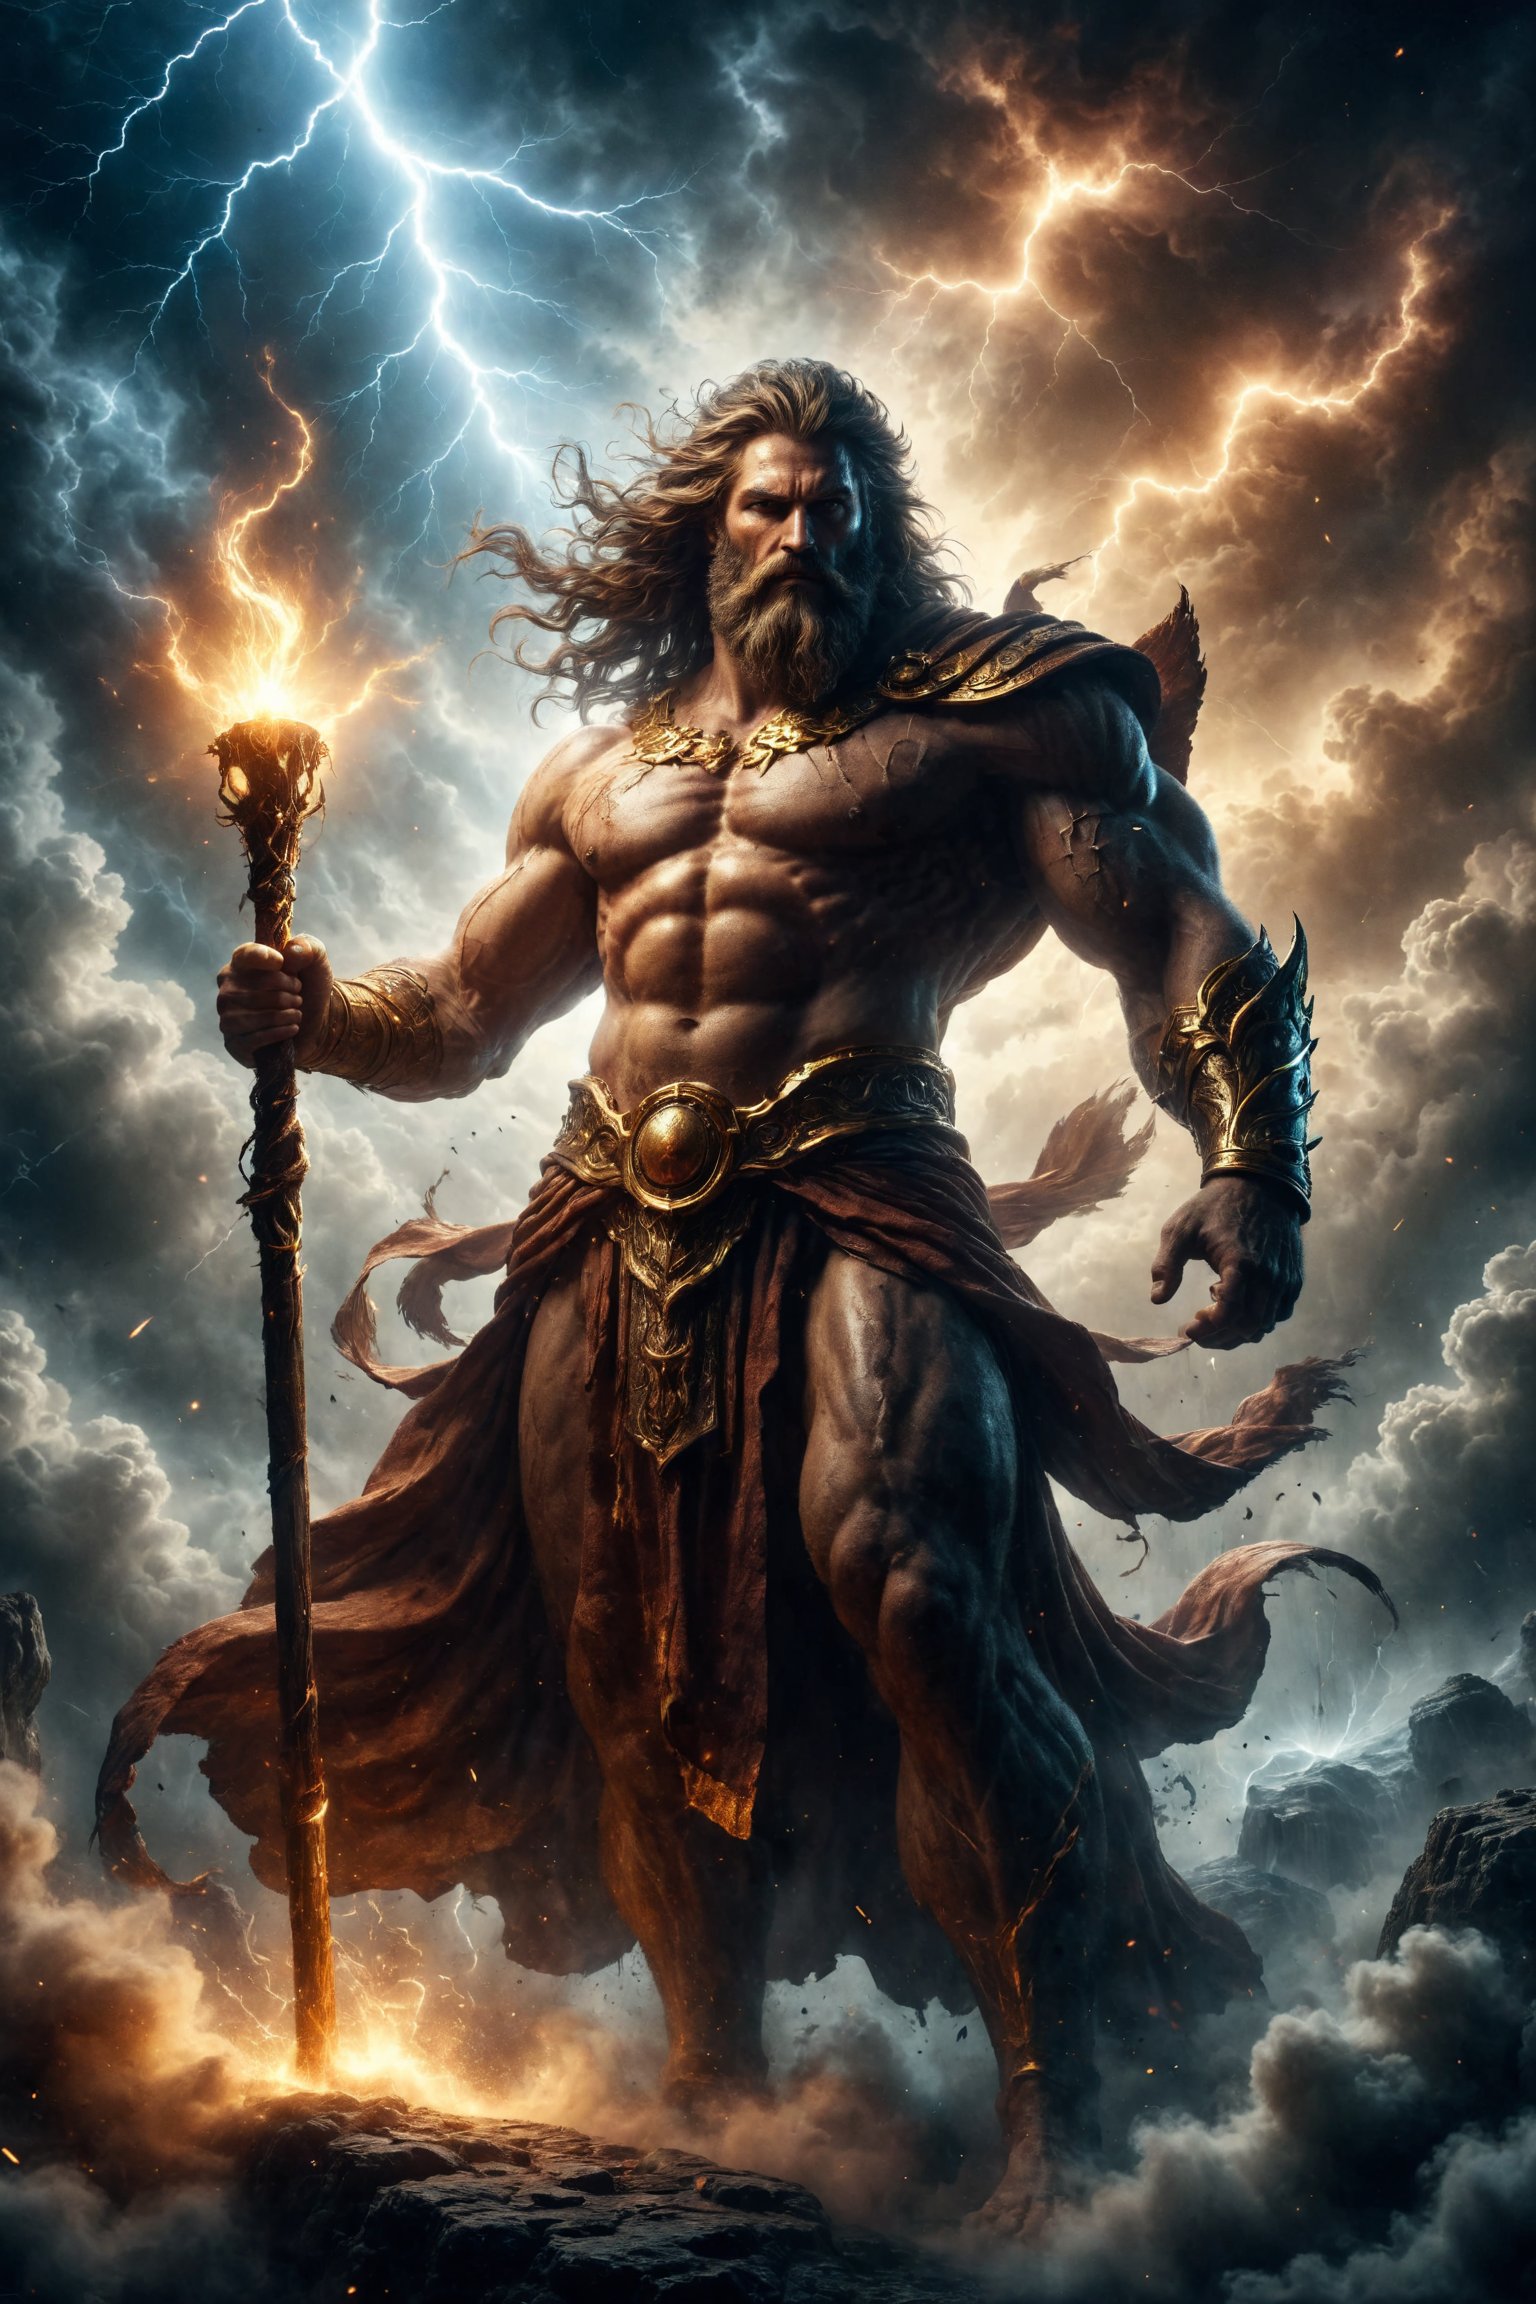 King of jupiter zeus full body, is a majestic and powerful god, wielding a lightning bolt. His colossal presence and authority symbolize the size and grandeur of Jupiter, the king of planets. Tall and stately, with a thick beard and wavy hair. He wears a royal robe and holds a thunderbolt in one hand and a scepter in the other. His gaze is powerful and wise, like the ruler of all the gods.